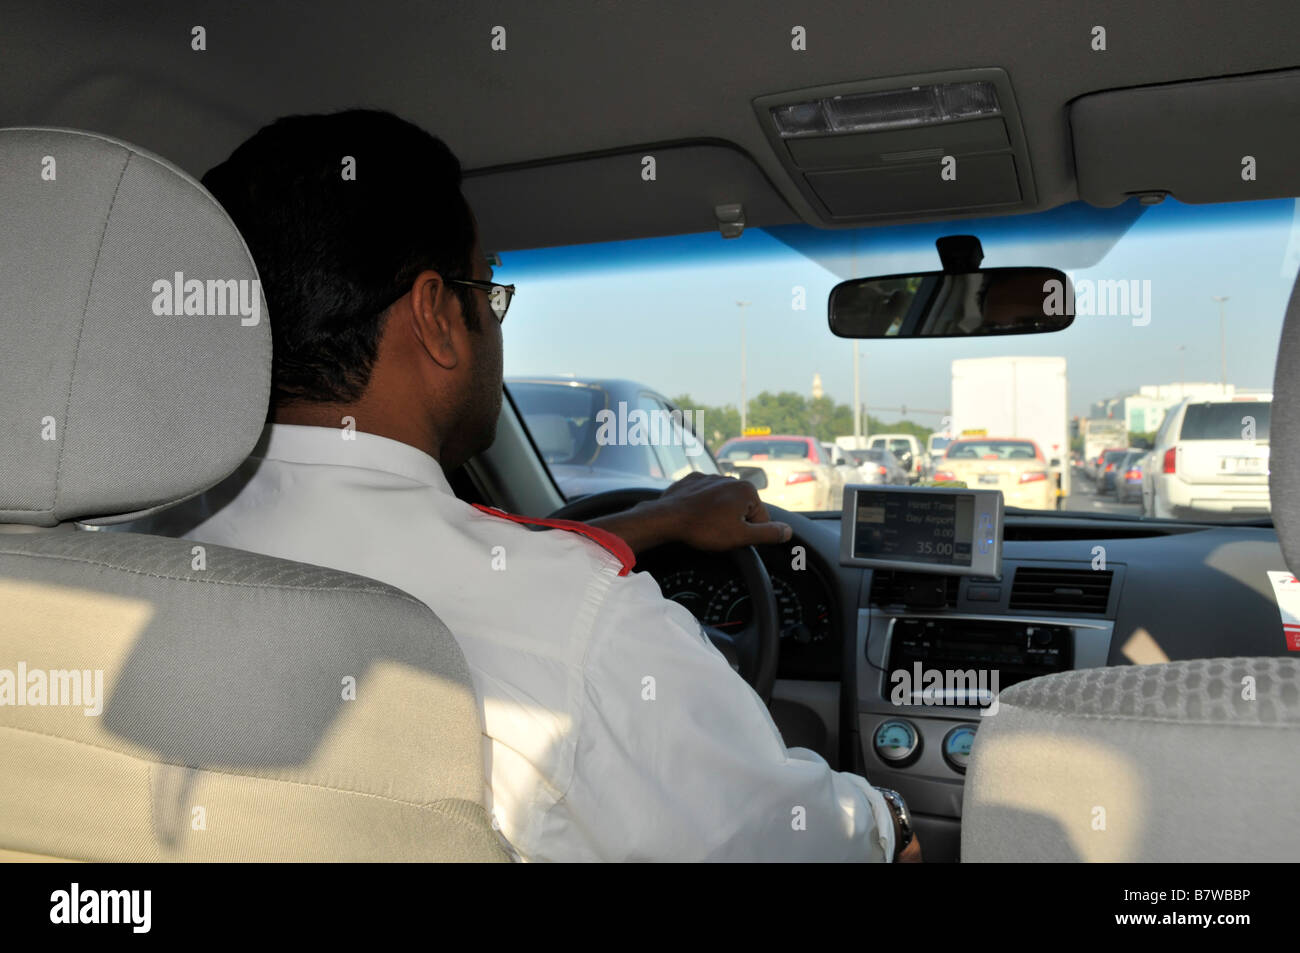 Interior close up back view Dubai taxi cab worker driver hand on steering wheel driving along busy road stuck in traffic jam United Arab Emirates UAE Stock Photo